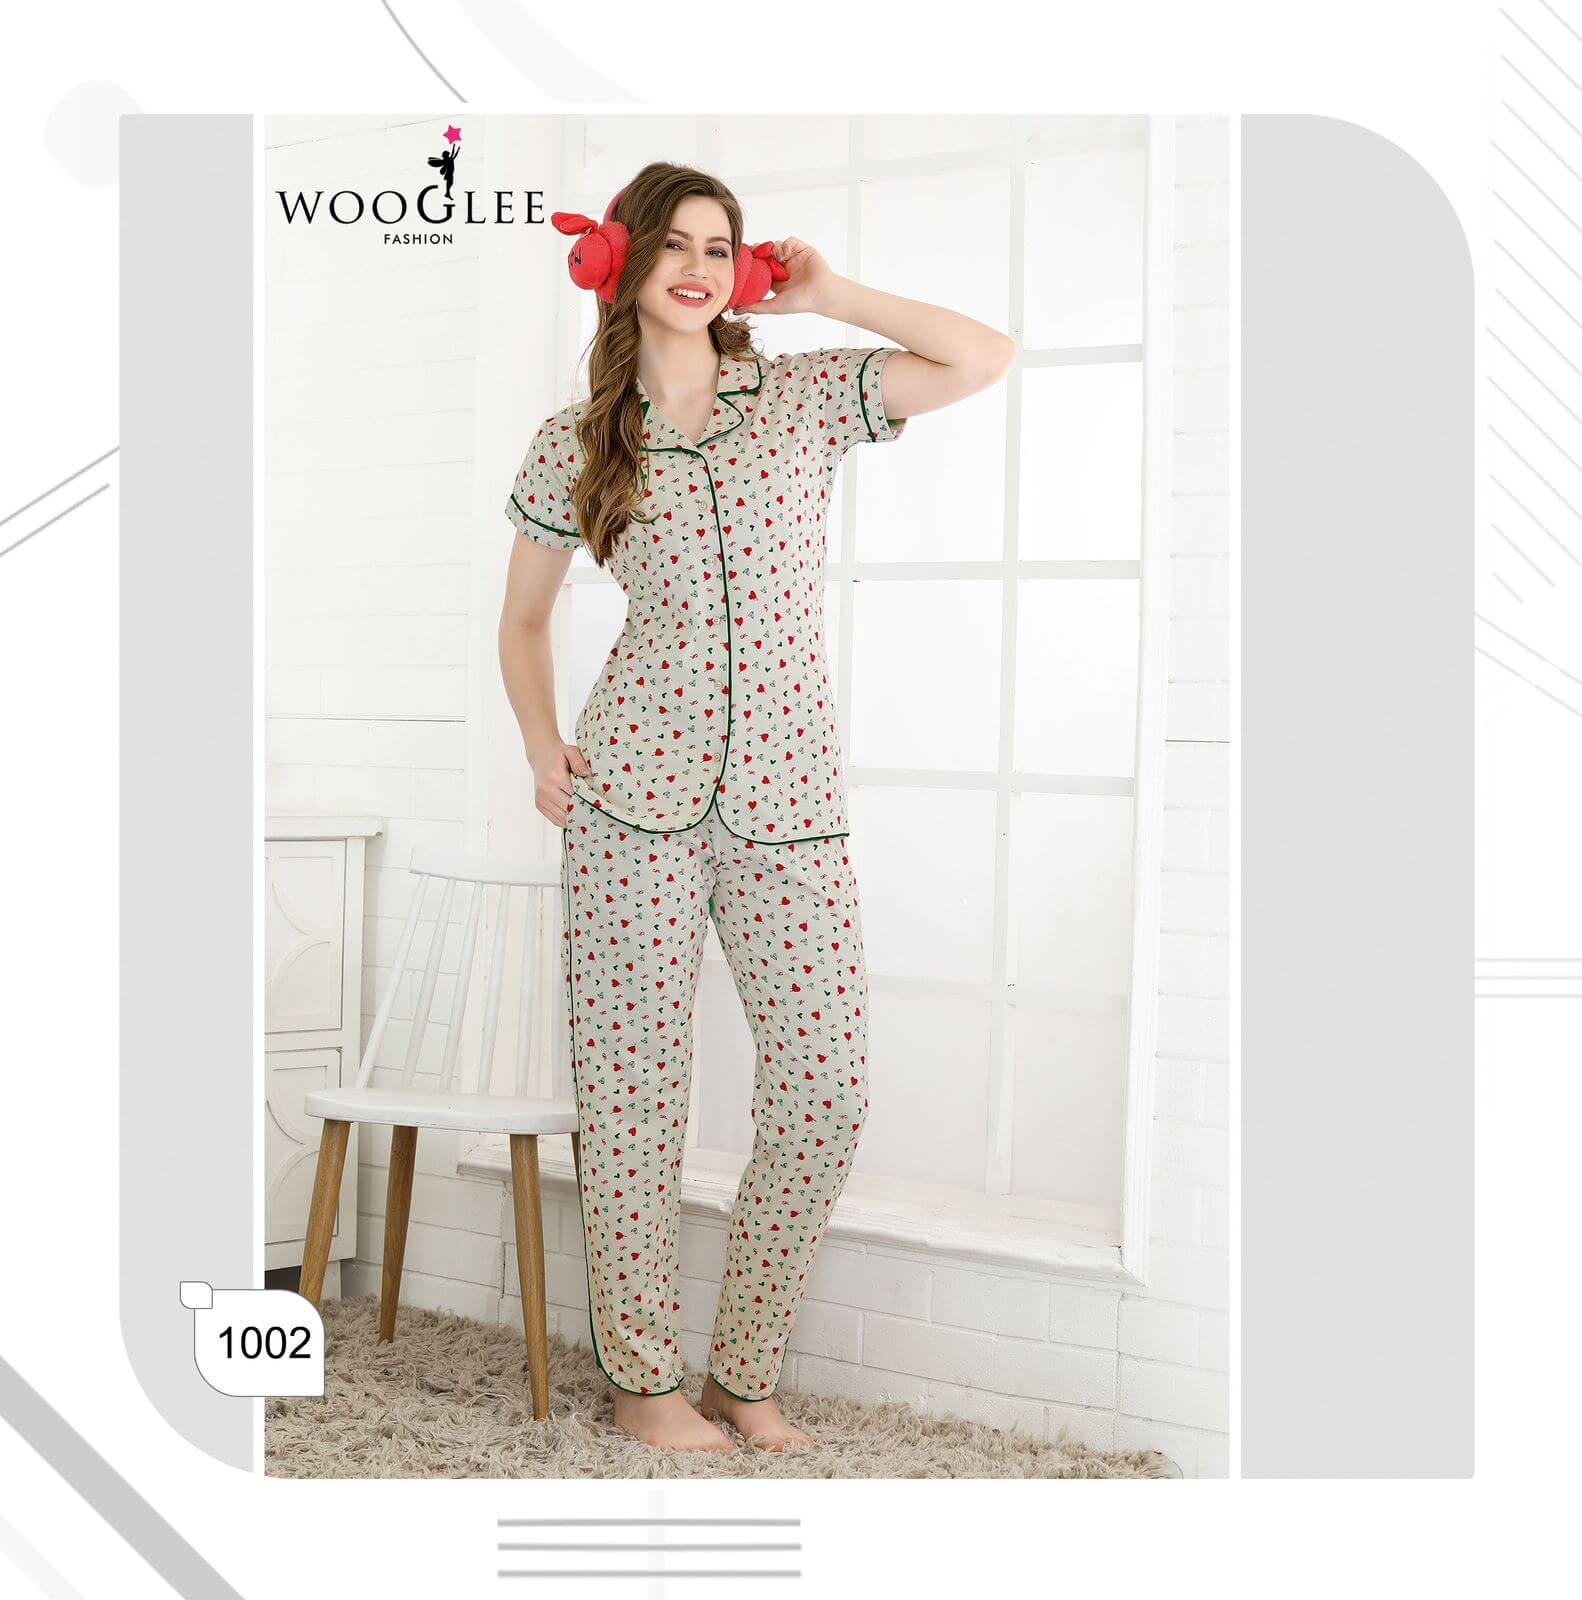 Wooglee Fashion Night Out vol 3 Night Dress Catalog collection 2